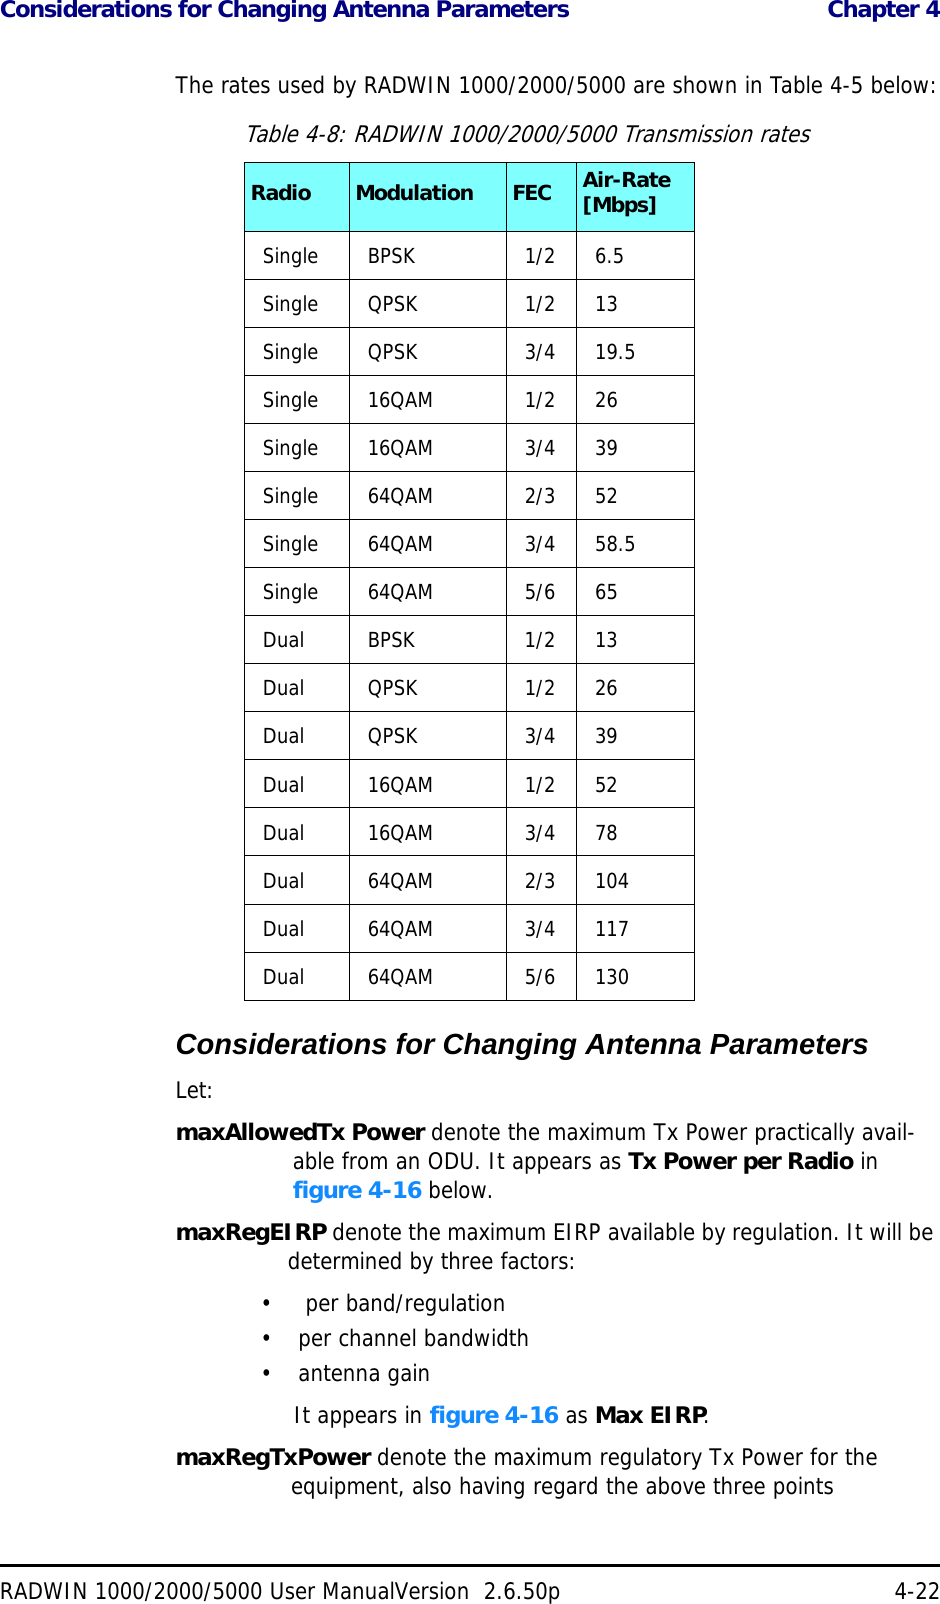 Considerations for Changing Antenna Parameters  Chapter 4RADWIN 1000/2000/5000 User ManualVersion  2.6.50p 4-22The rates used by RADWIN 1000/2000/5000 are shown in Table 4-5 below:Considerations for Changing Antenna ParametersLet:maxAllowedTx Power denote the maximum Tx Power practically avail-able from an ODU. It appears as Tx Power per Radio in figure 4-16 below.maxRegEIRP denote the maximum EIRP available by regulation. It will be determined by three factors:•  per band/regulation• per channel bandwidth•antenna gainIt appears in figure 4-16 as Max EIRP.maxRegTxPower denote the maximum regulatory Tx Power for the equipment, also having regard the above three pointsTable 4-8: RADWIN 1000/2000/5000 Transmission ratesRadio Modulation FEC Air-Rate [Mbps]Single BPSK 1/2 6.5Single QPSK 1/2 13Single QPSK 3/4 19.5Single 16QAM 1/2 26Single 16QAM 3/4 39Single 64QAM 2/3 52Single 64QAM 3/4 58.5Single 64QAM 5/6 65Dual BPSK 1/2 13Dual QPSK 1/2 26Dual QPSK 3/4 39Dual 16QAM 1/2 52Dual 16QAM 3/4 78Dual 64QAM 2/3 104Dual 64QAM 3/4 117Dual 64QAM 5/6 130